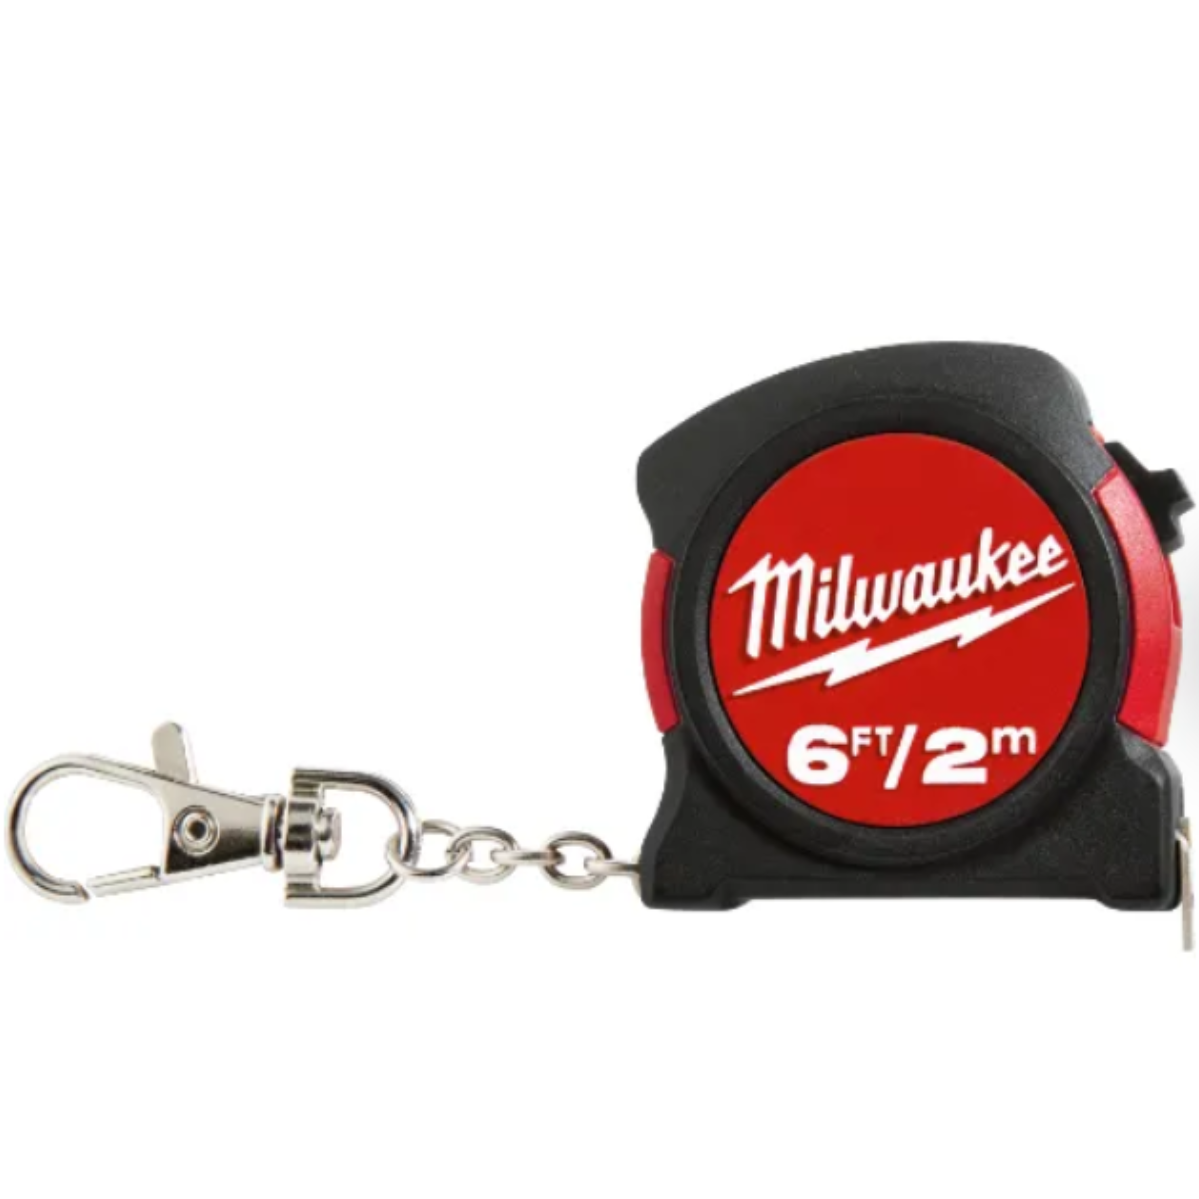 MILWAUKEE 2M/6FT Pocket Measuring Tape With Key Chain 48-22-5506